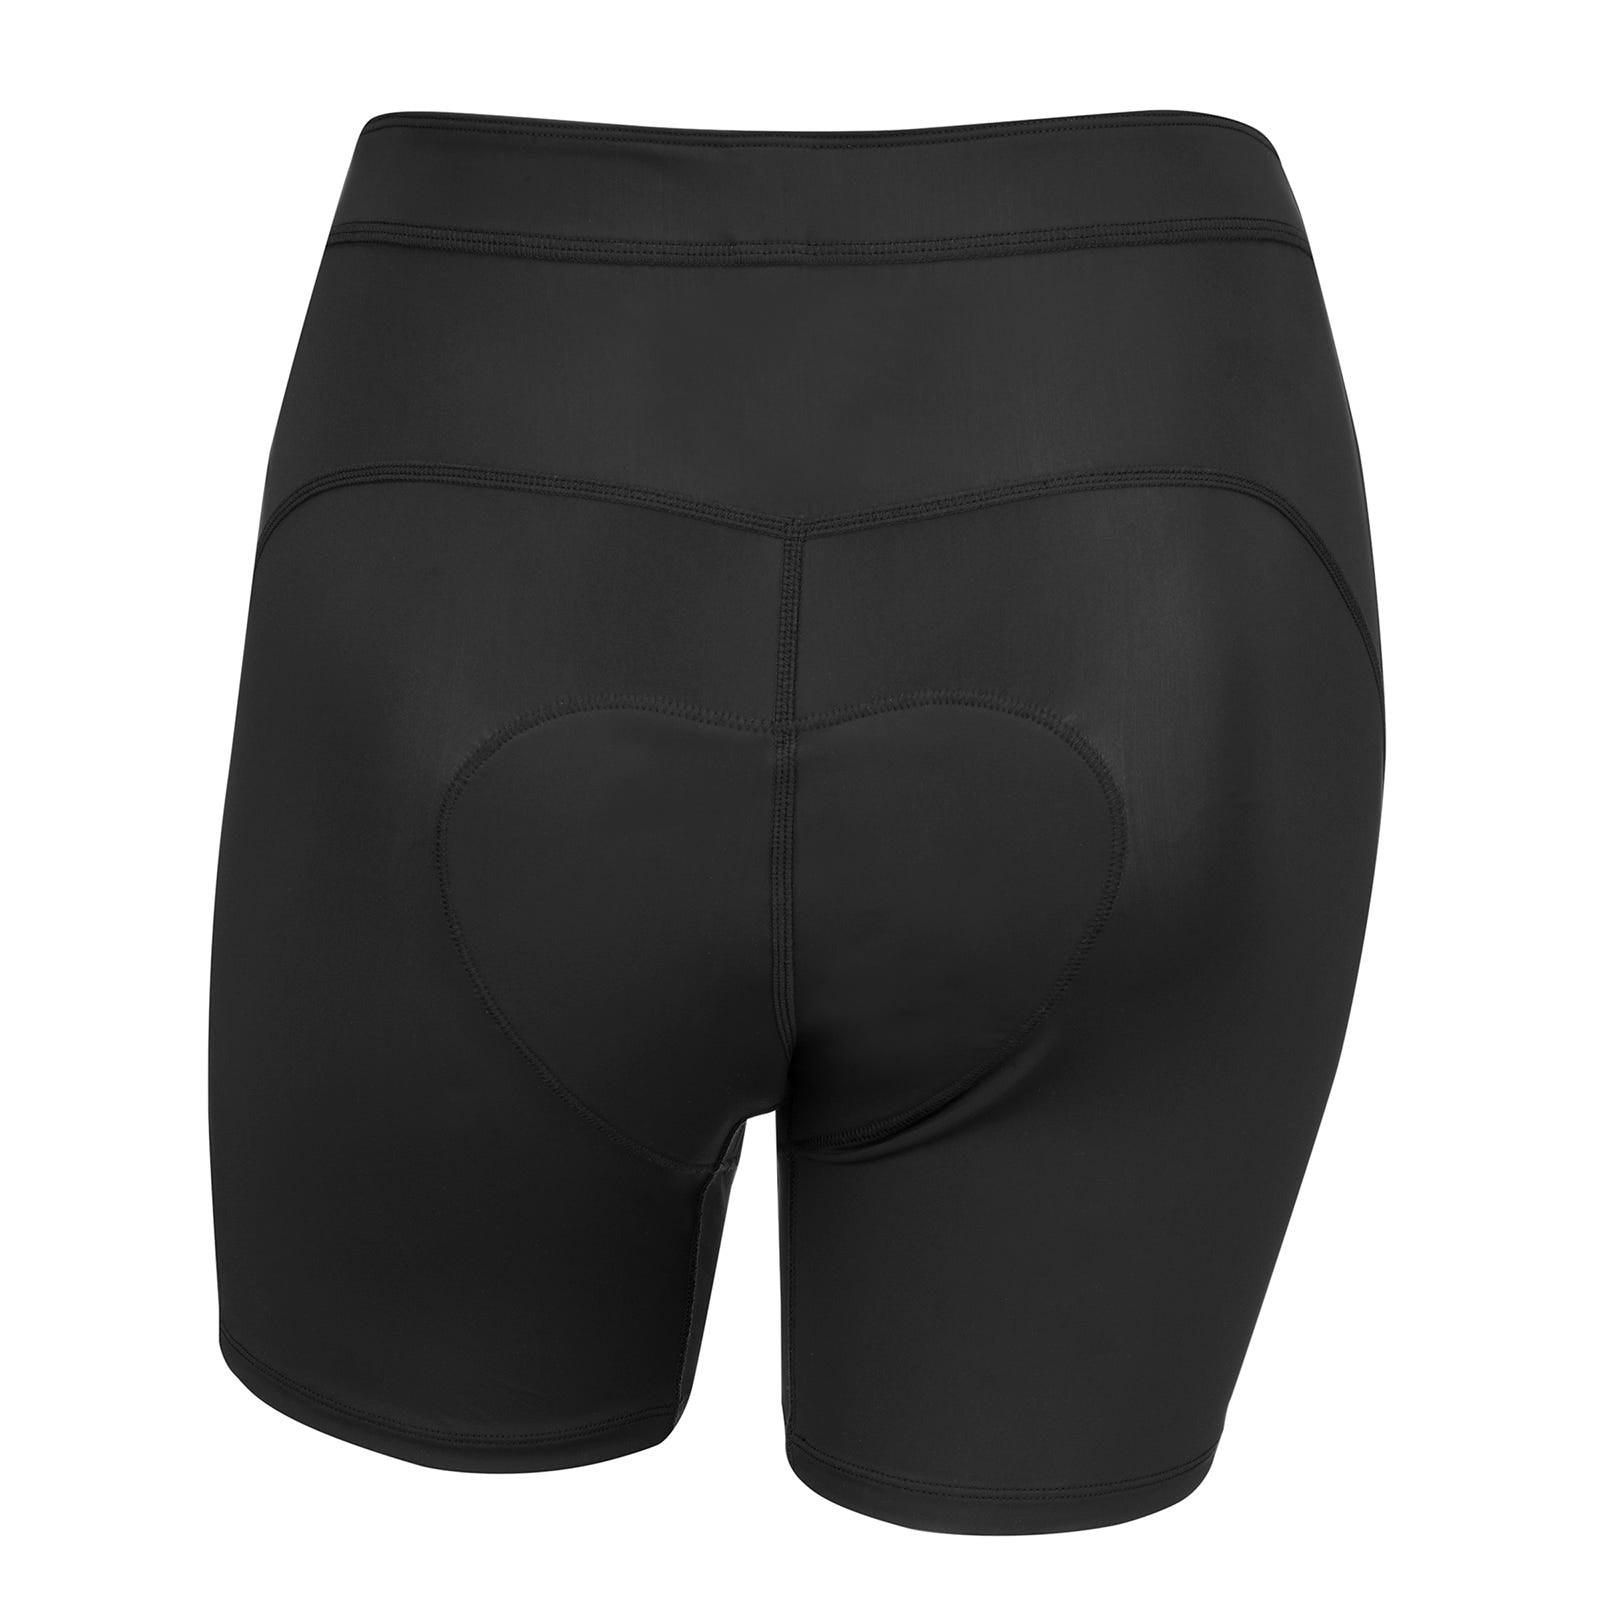 Ladies' Protective Riding Shorts - Factory Recreation